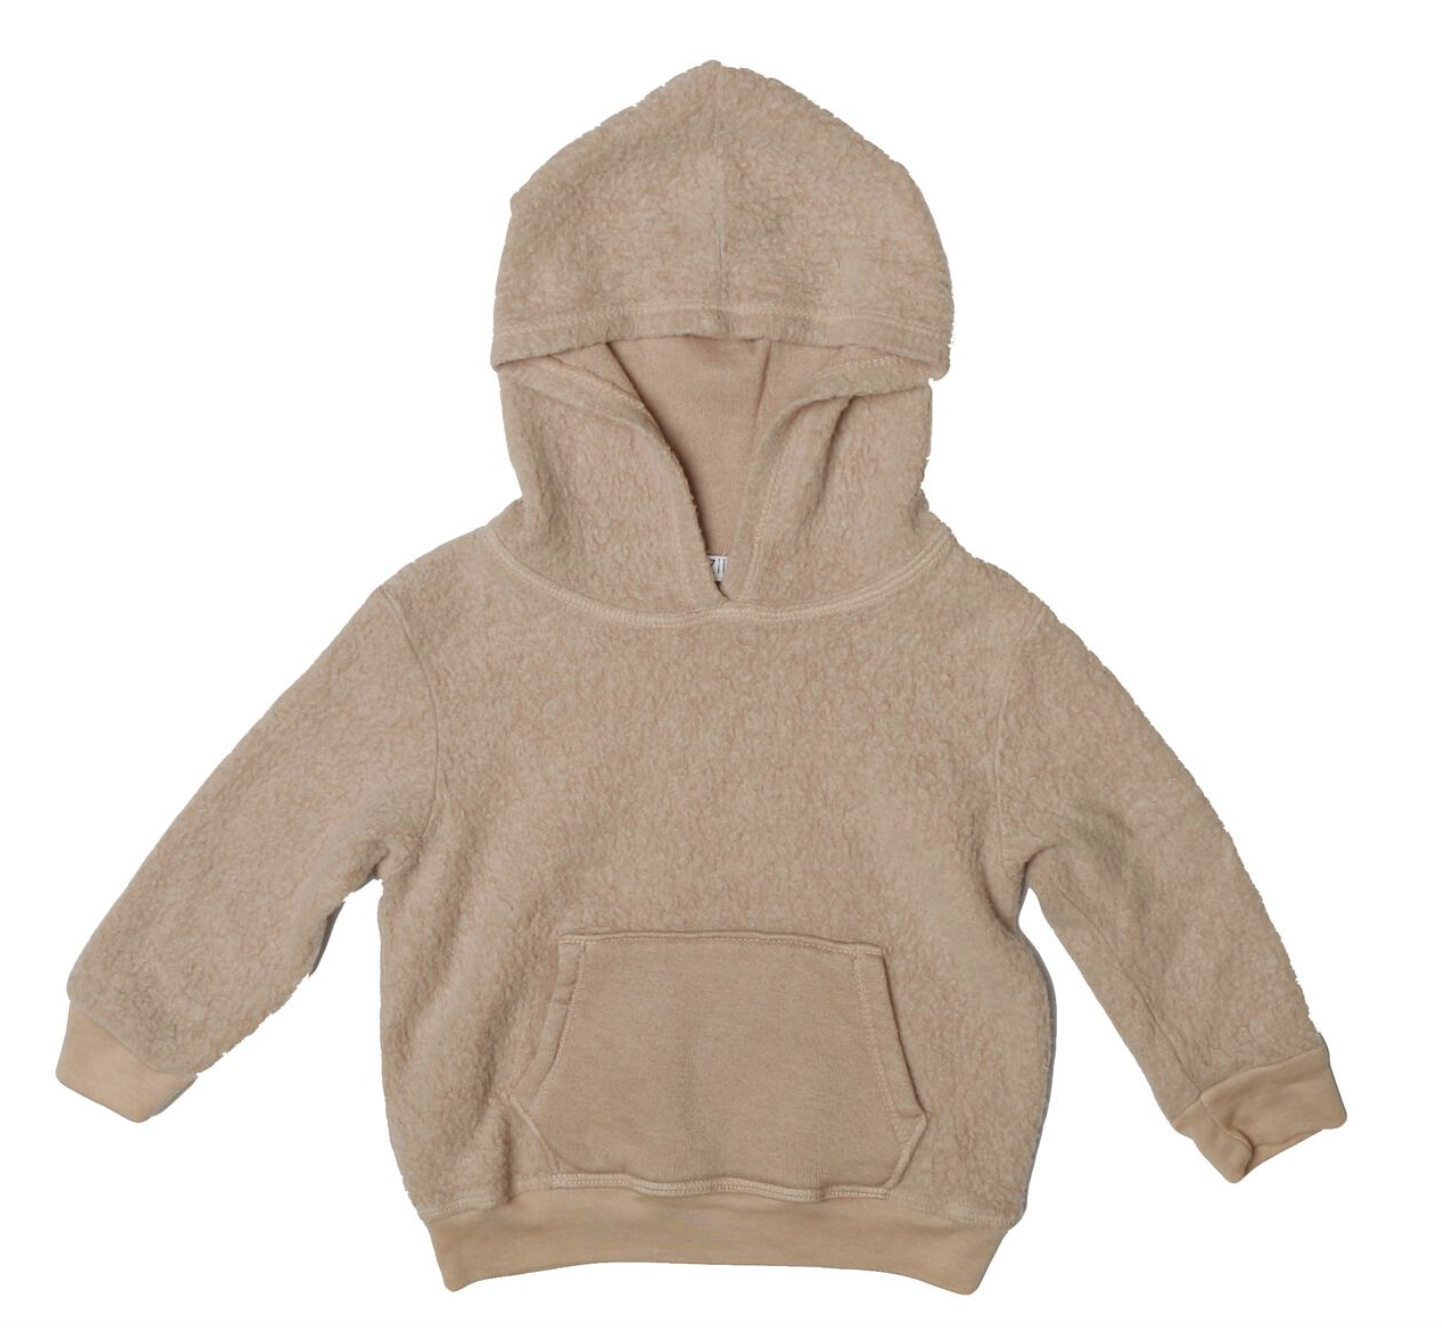 Cozii REVERSIBLE  L/S HOODED PULLOVER-Beige